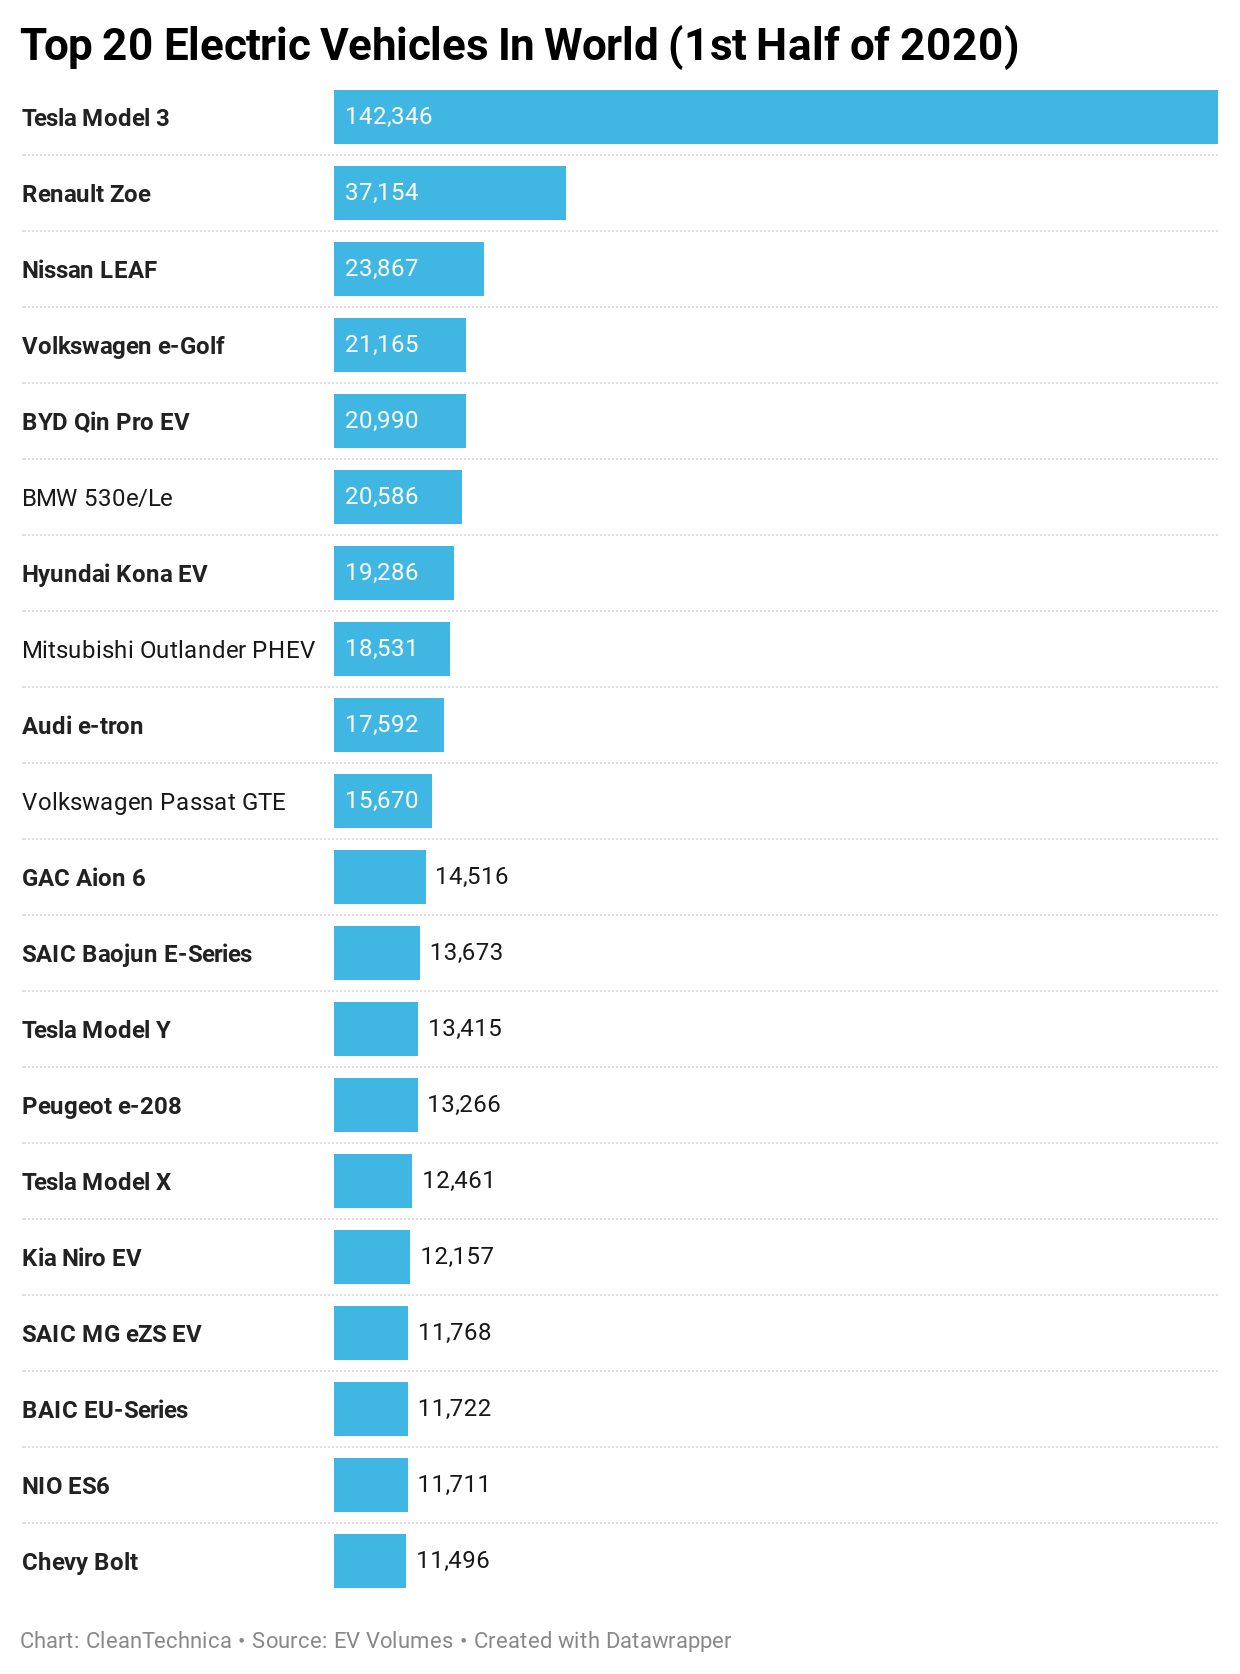 Tesla Model 3 Had More Sales Than 2nd, 3rd, 4th, 5th, + 6th Best Selling Electric Vehicles In 1st Half Of 2020